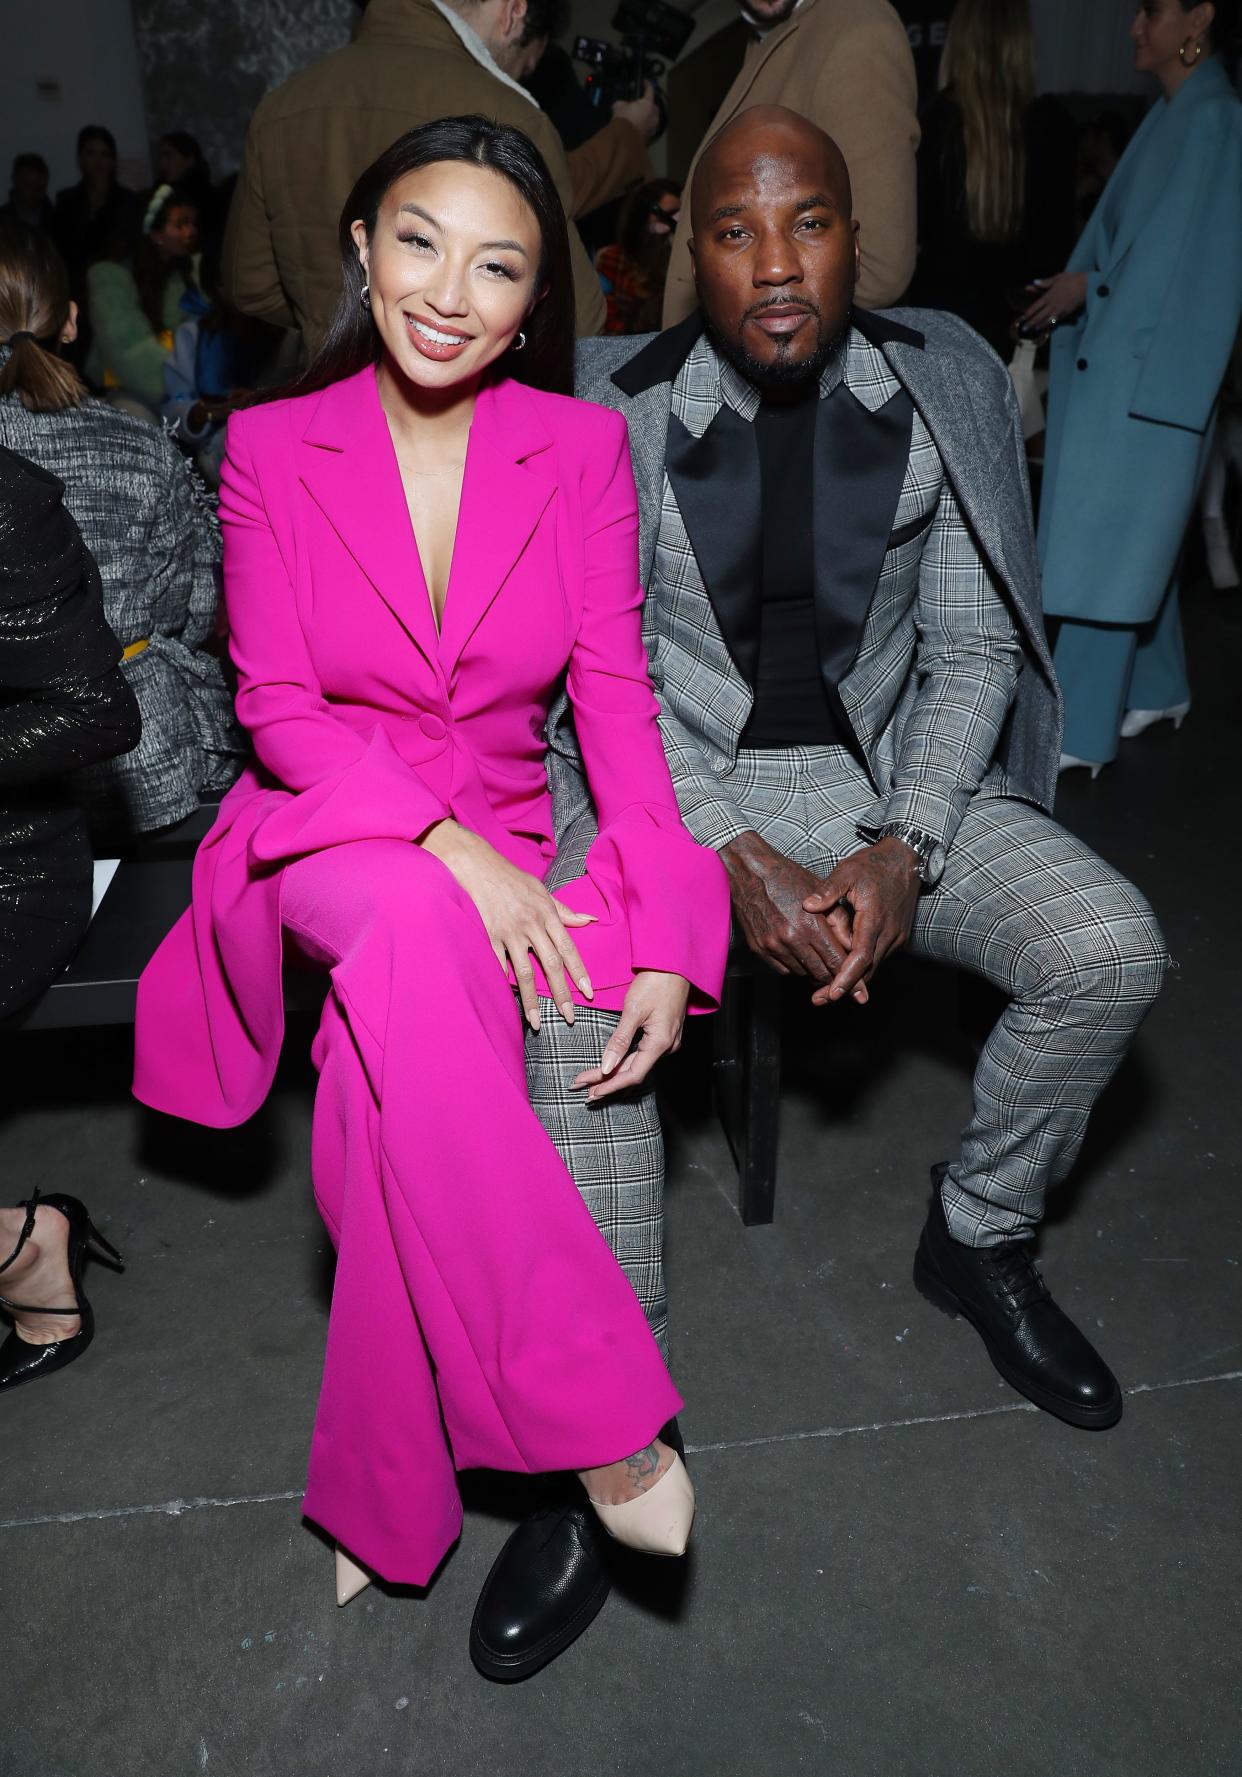 Jeannie Mai and Jeezy are divorcing after two years of married life.